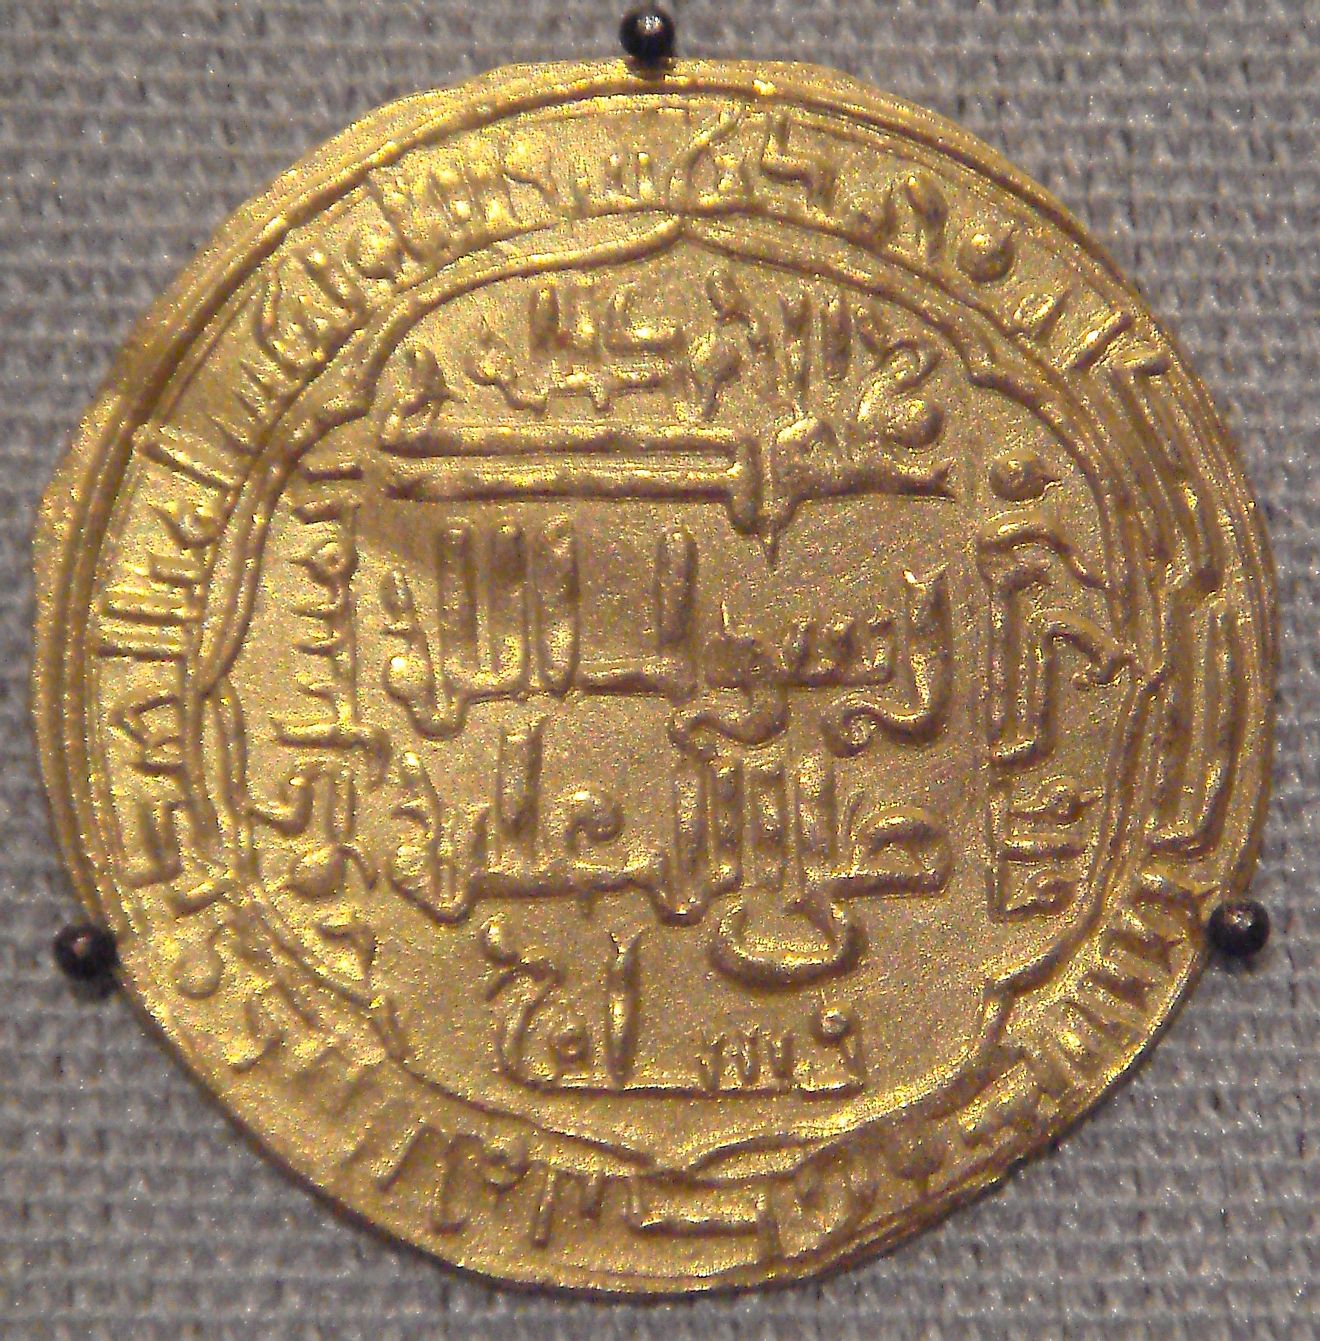 A gold coin belonging to the Abbasid Caliphate.